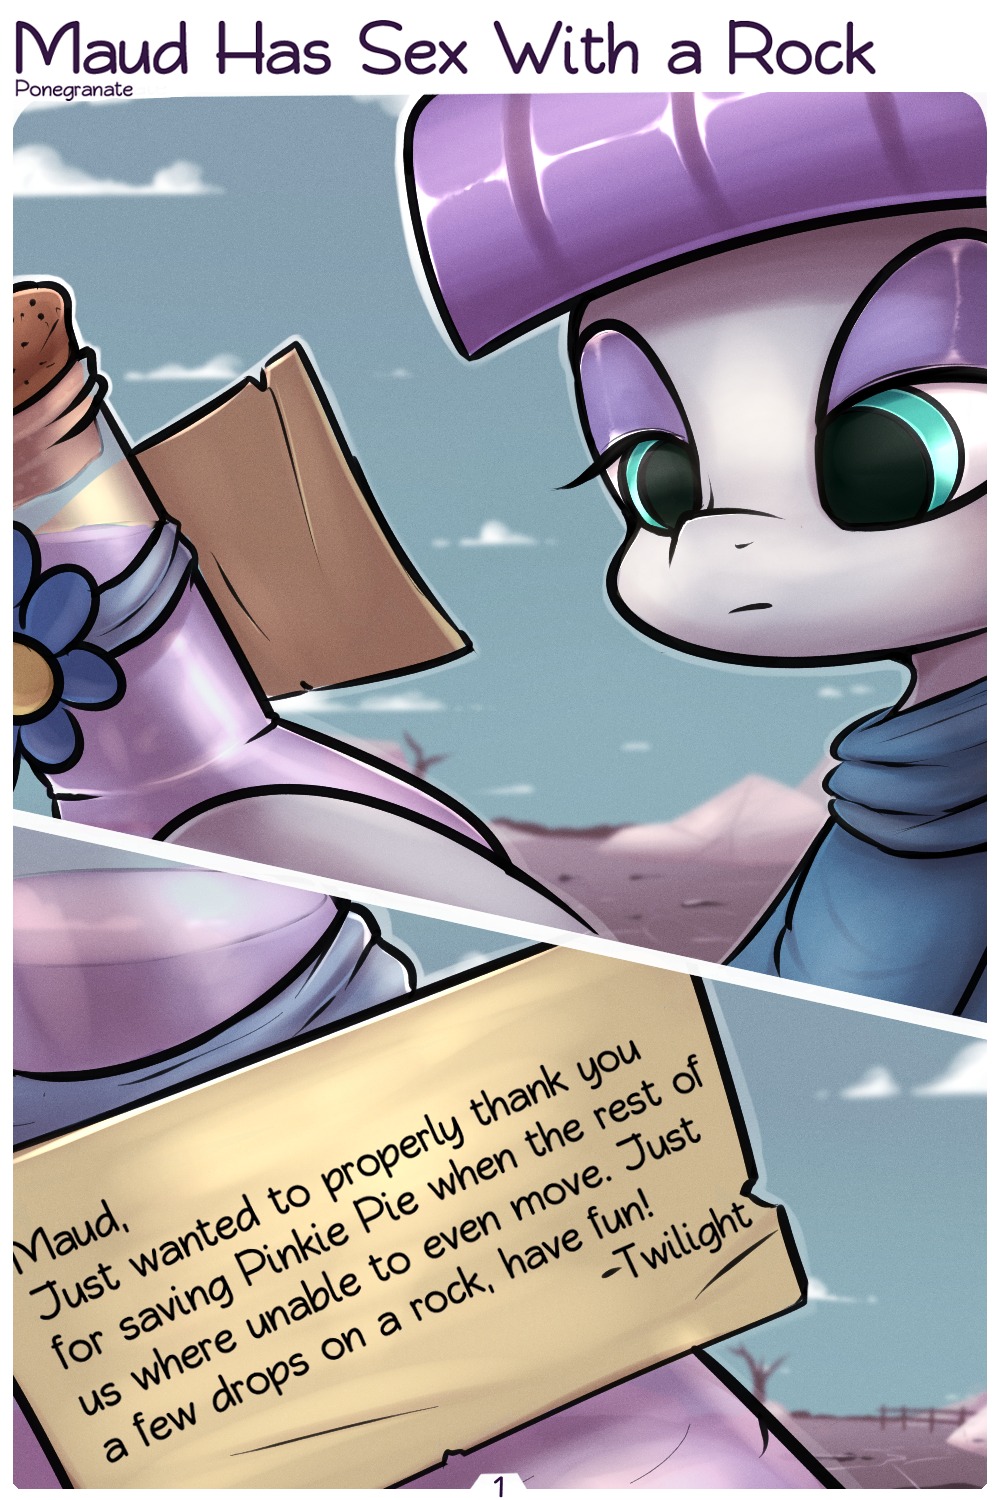 Maud Has Sex With a Rock My Little Pony Friendship is Magic00